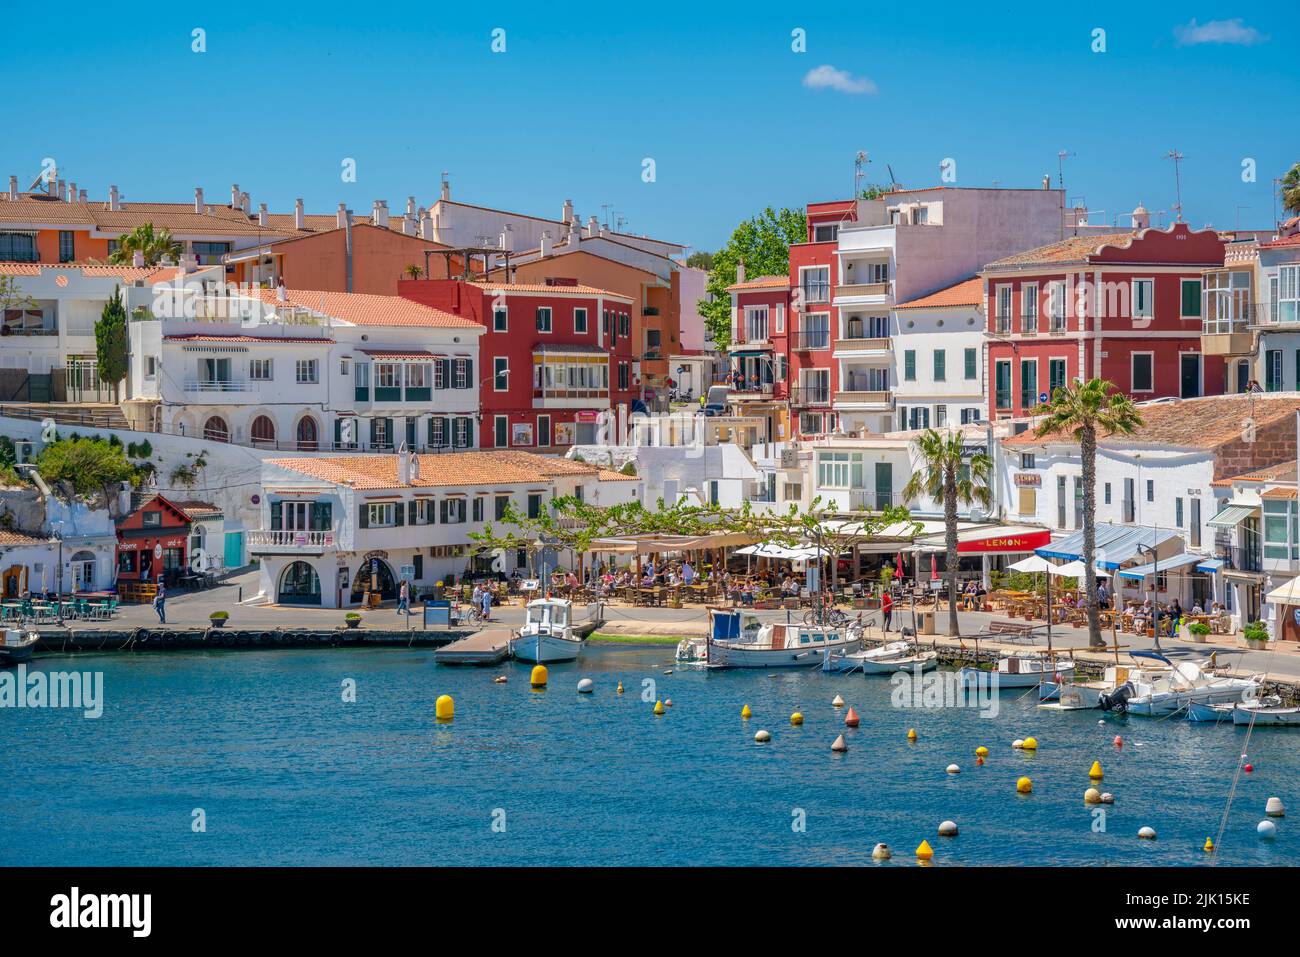 View of colourful cafes, restaurants and boats in harbour against blue sky, Cales Fonts, Menorca, Balearic Islands, Spain, Mediterranean, Europe Stock Photo